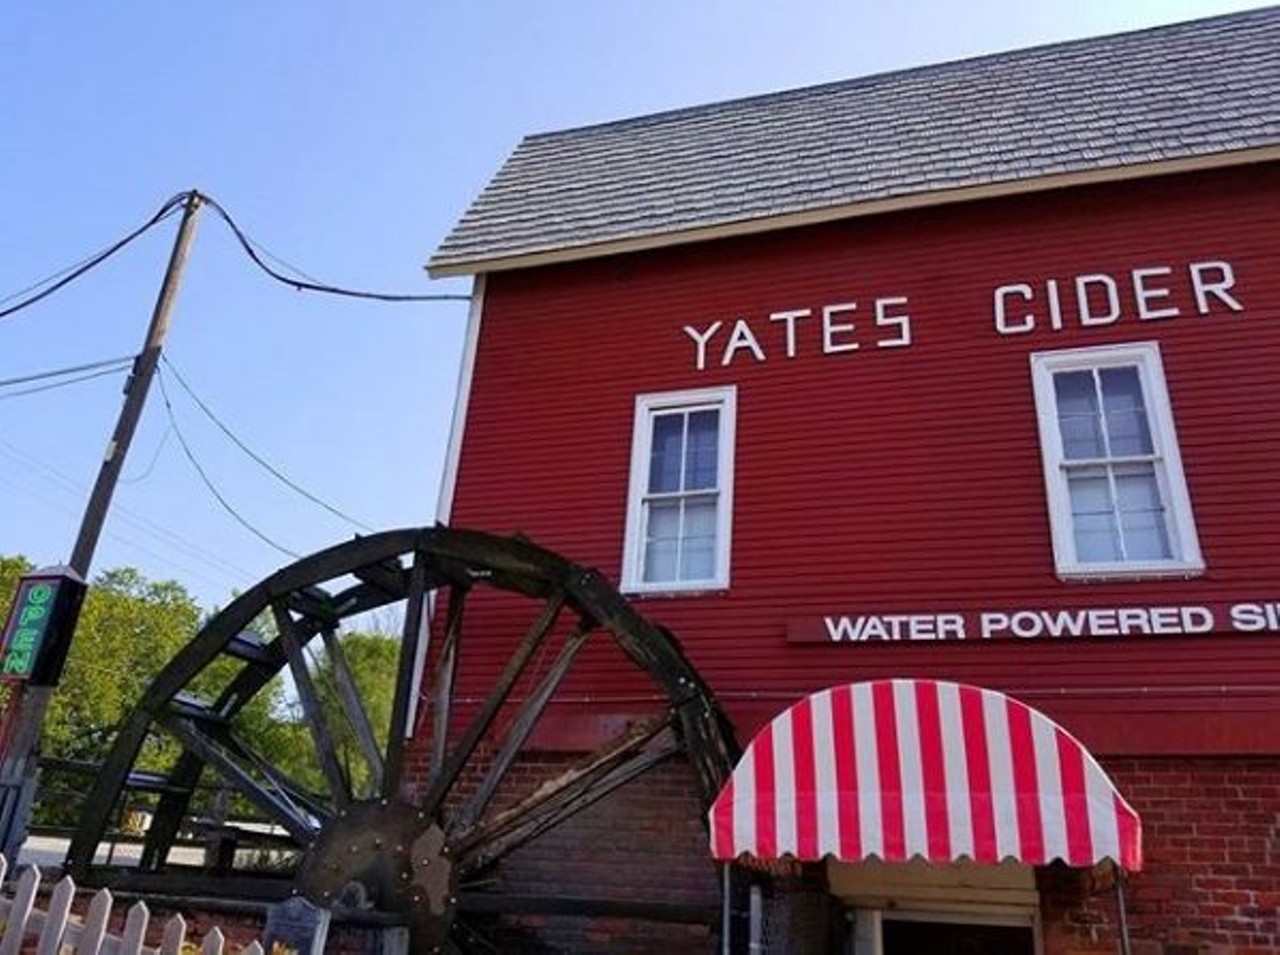 Yates Cider Mill  
1990 E. Avon Rd., Rochester Hills; 248-651-8300; yatescidermill.com  
Surrounded by beautiful parks fit for picnics and hiking, the Yates Cider Mill has as many as 24 varieties of apples &#151; usually five or six different kinds at once &#151; go into its ciders. In addition to the main store&#146;s donuts, butters, apples and syrup, a second shop can be found across a small bridge selling such specialty items as Frankenmuth fudge. Pair a donut or the fudge with one of the 20 different flavors of premium ice cream served at the Ice Cream Shoppe, which runs through September. Photo via @downwithdetroit.